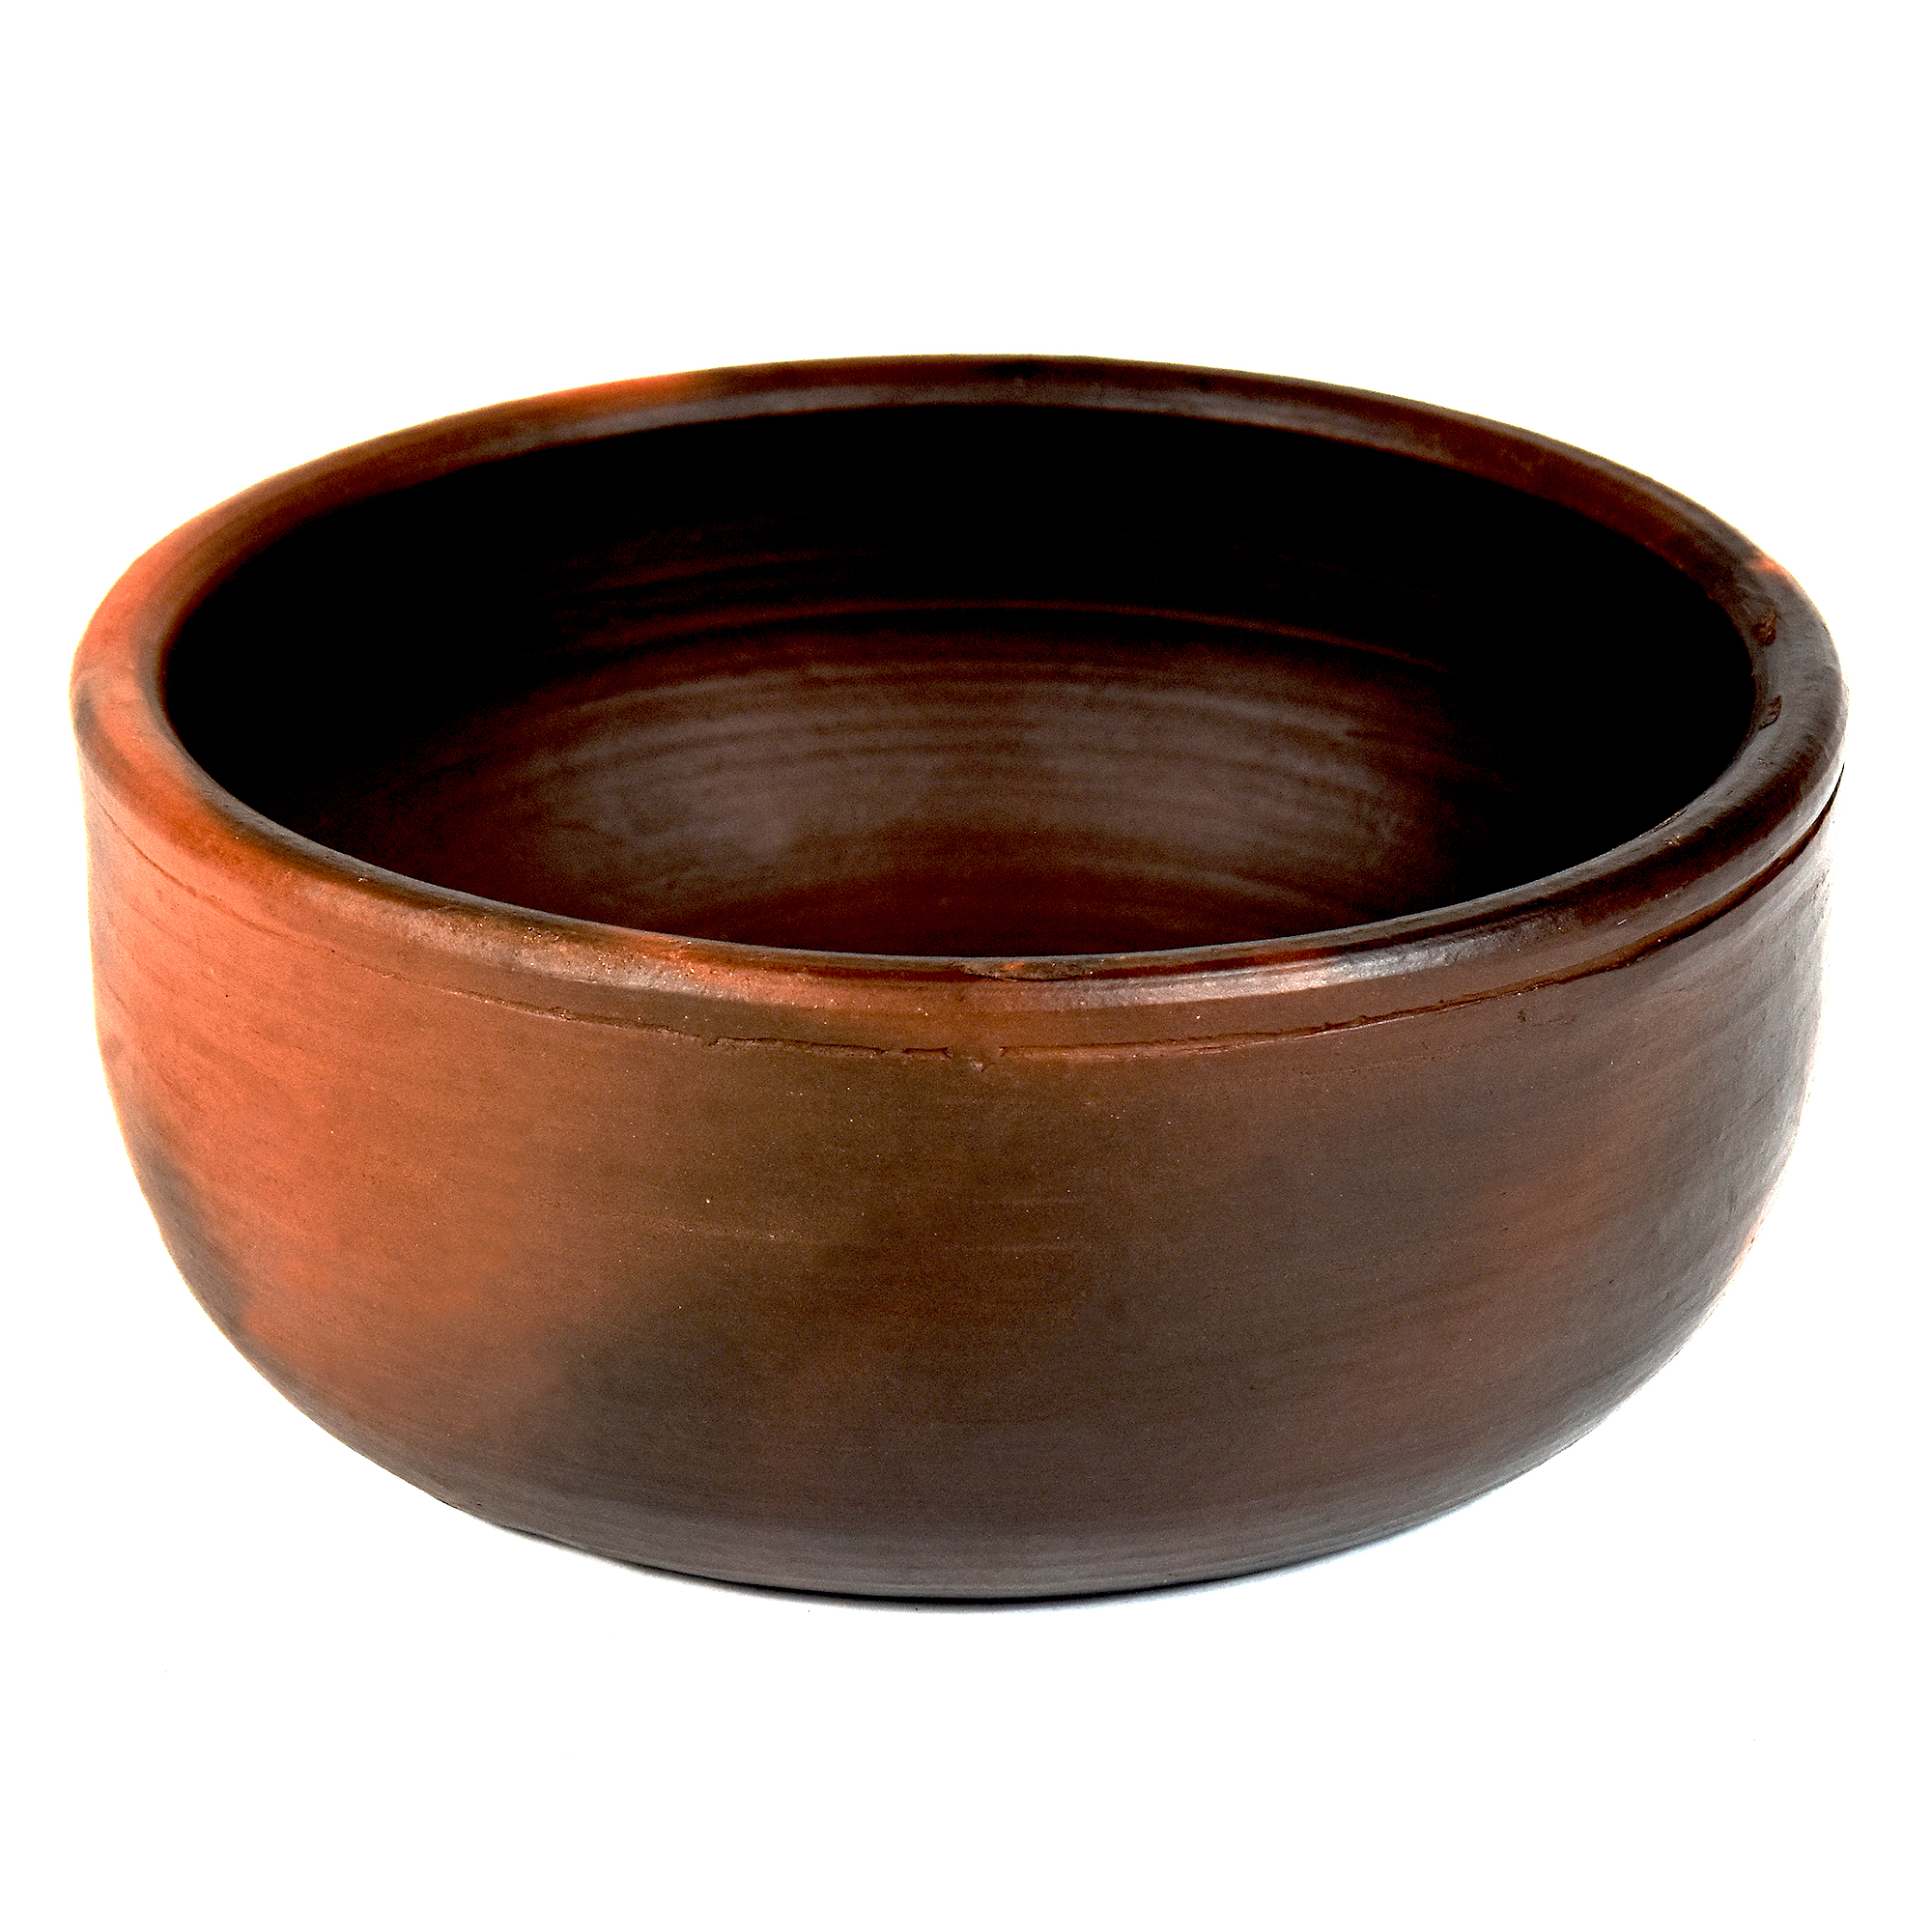 Straight Sided Clay Pomaireware Bowl